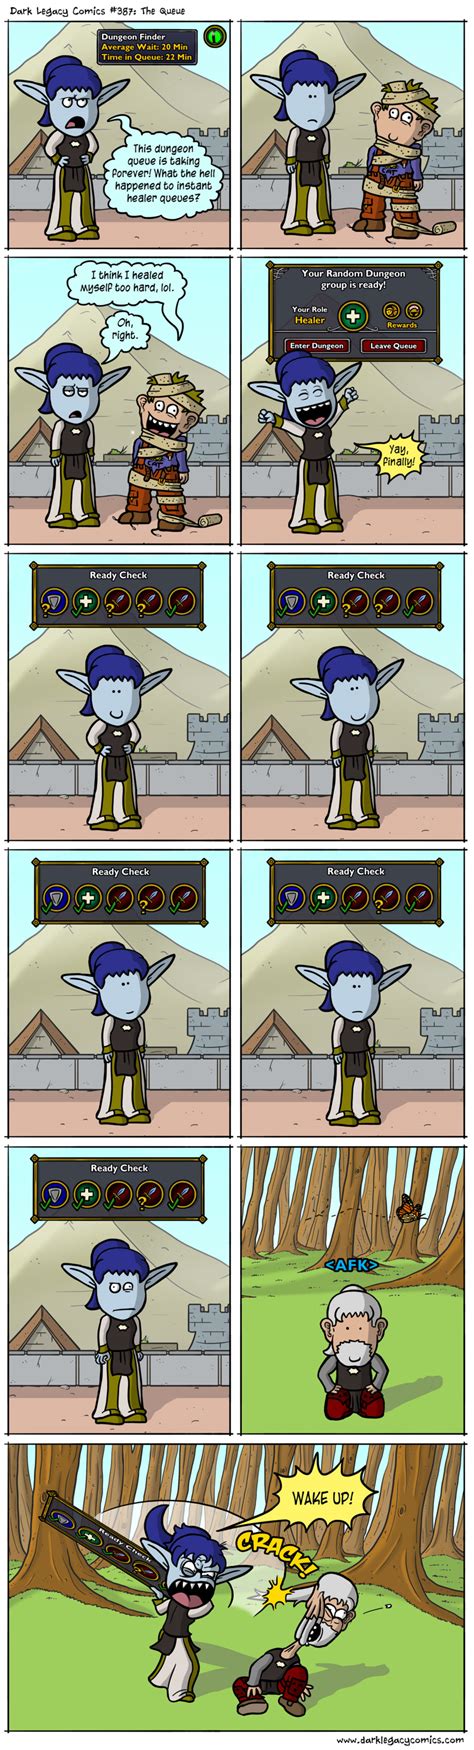 lol i ve been here and done this dark legacy comics warcraft funny world of warcraft game